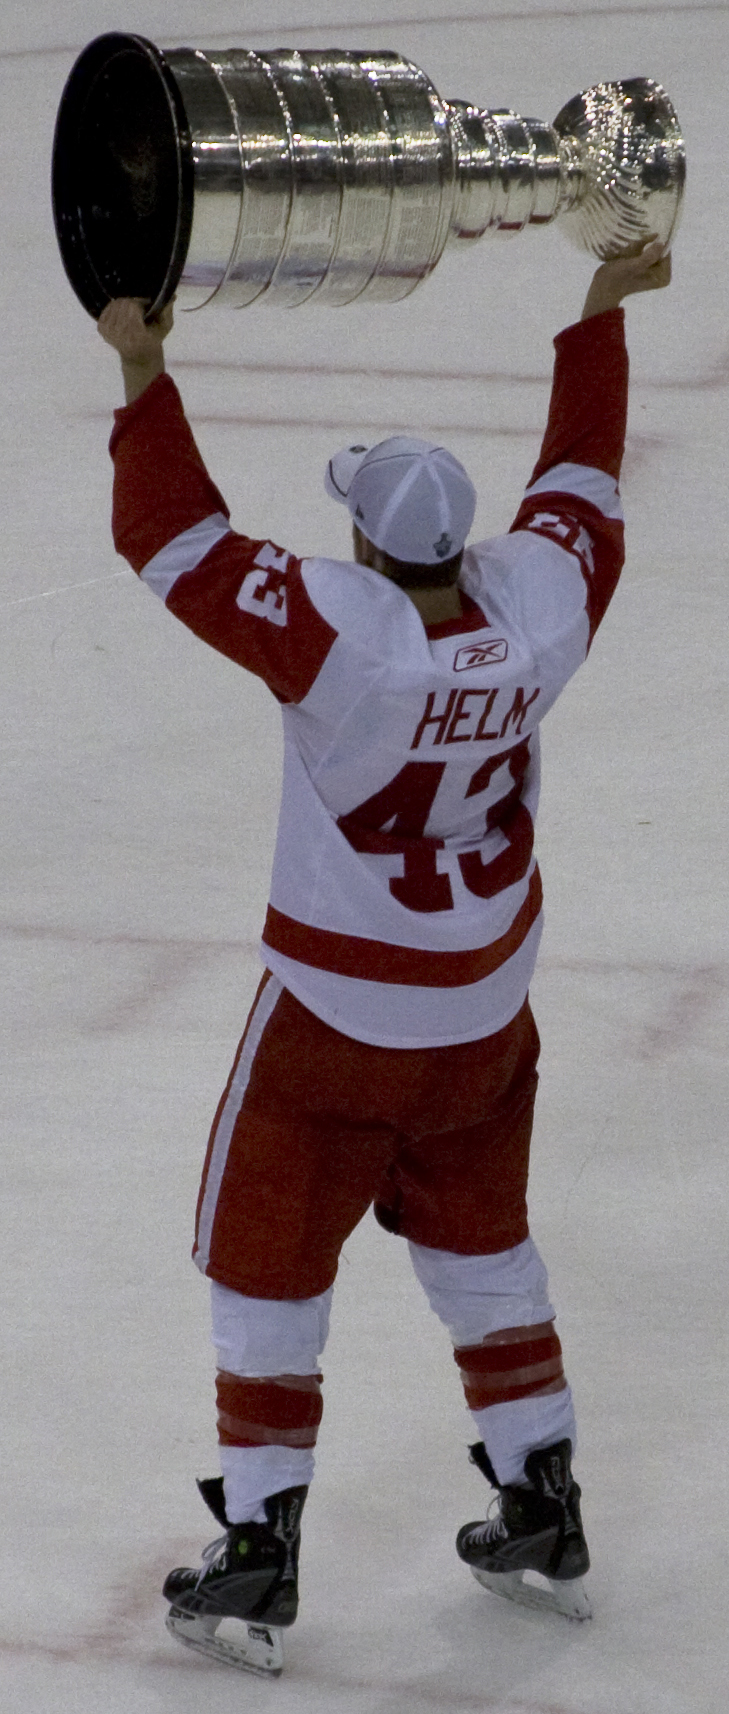 Darren_Helm_with_Stanley_Cup_Cropped.jpg